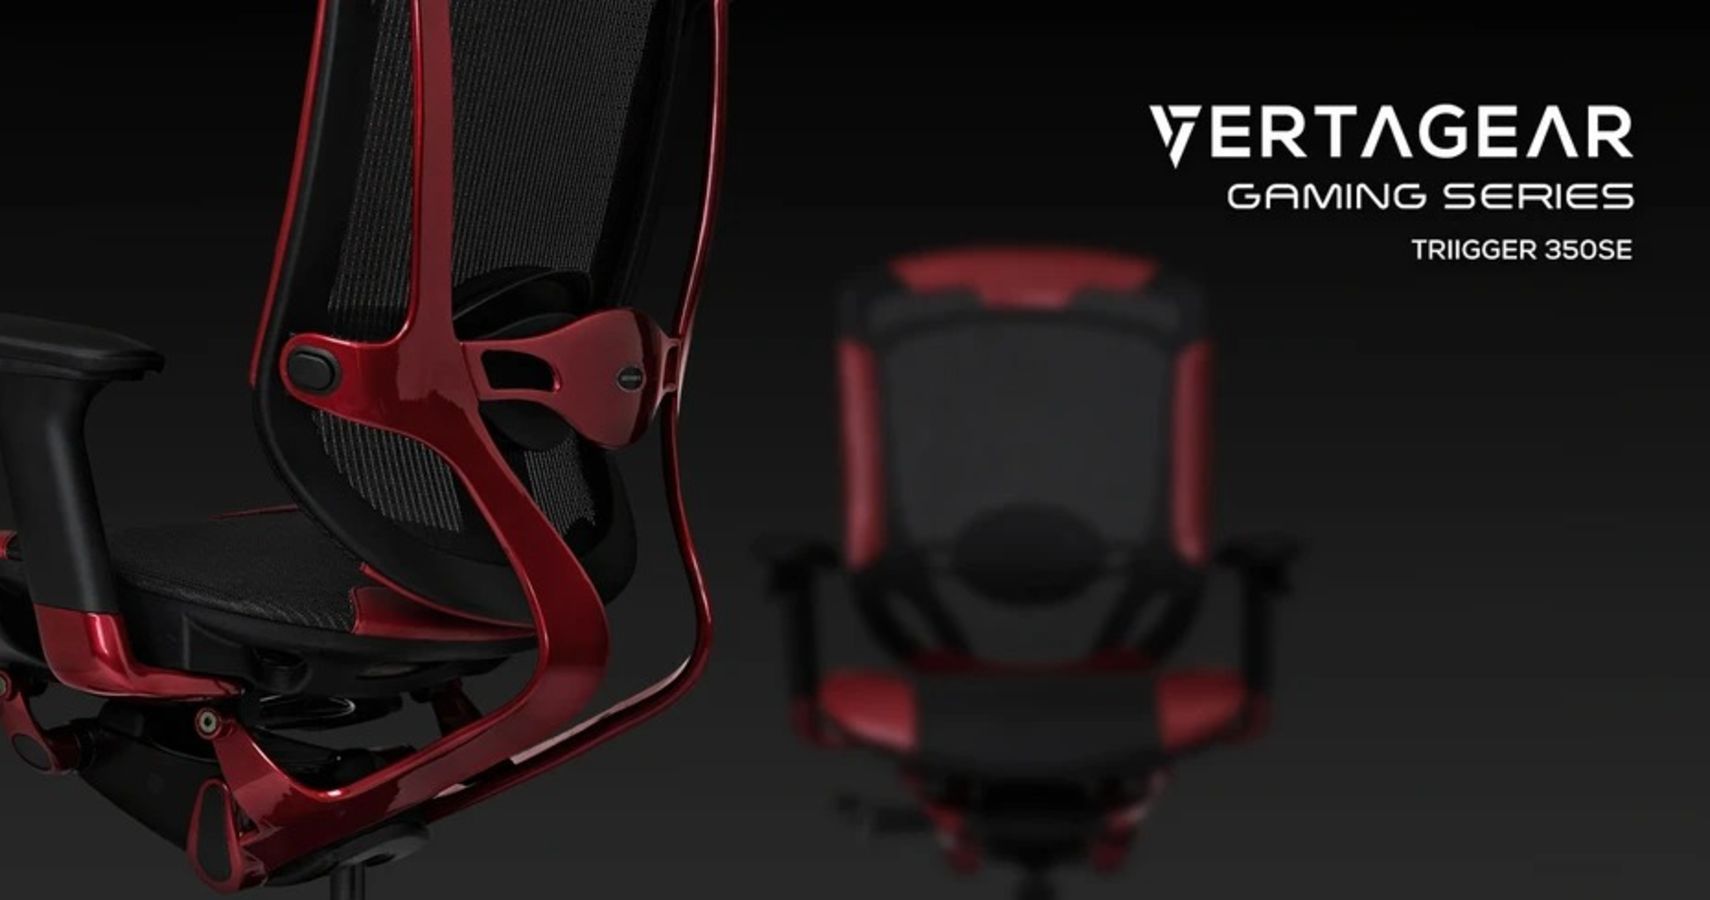 Vertagear Triigger 350 SE Review  The Gaming Chair Grows Up